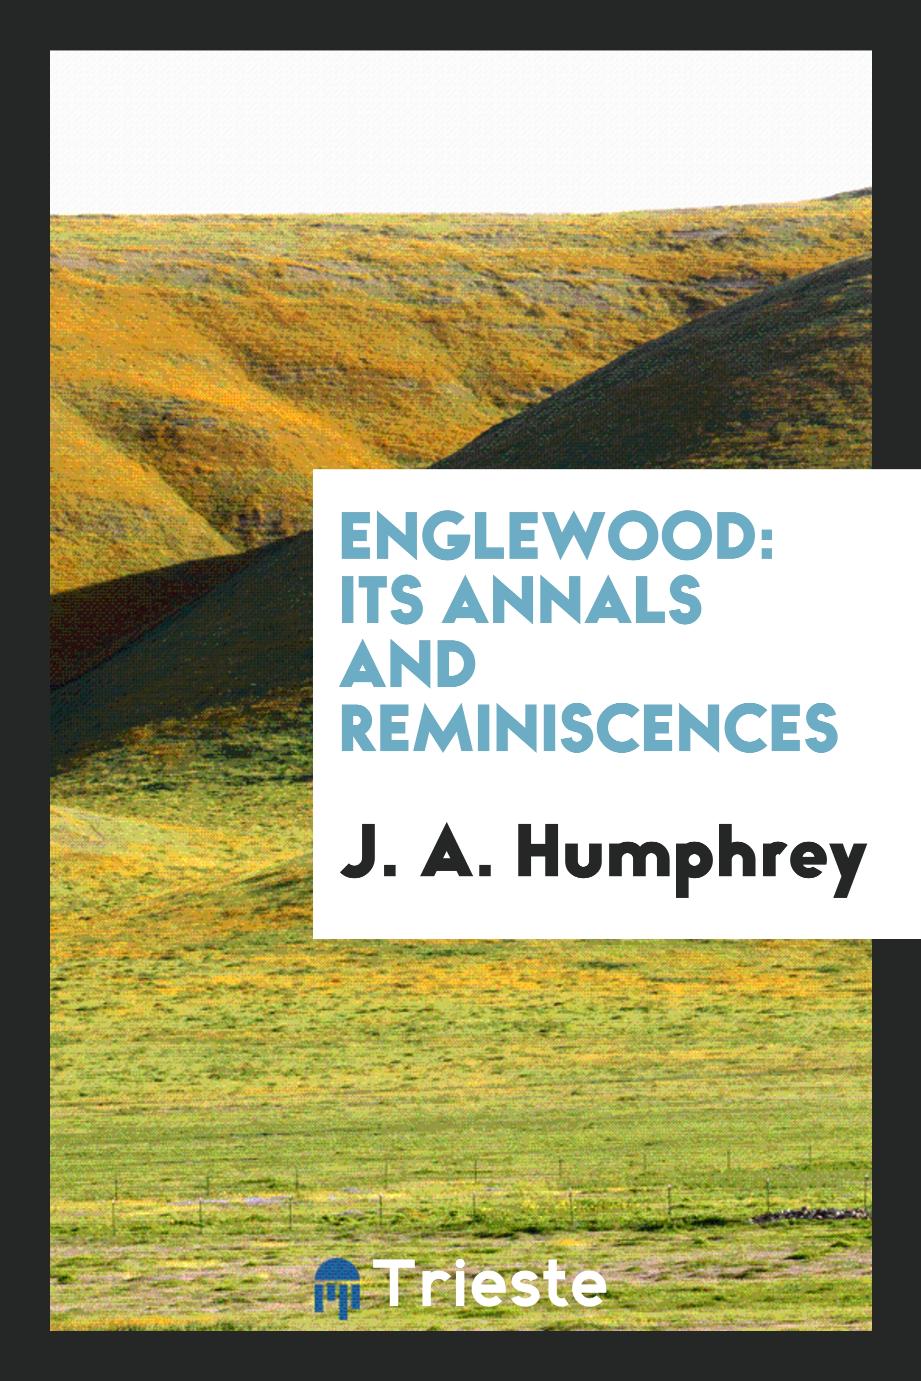 Englewood: Its Annals and Reminiscences